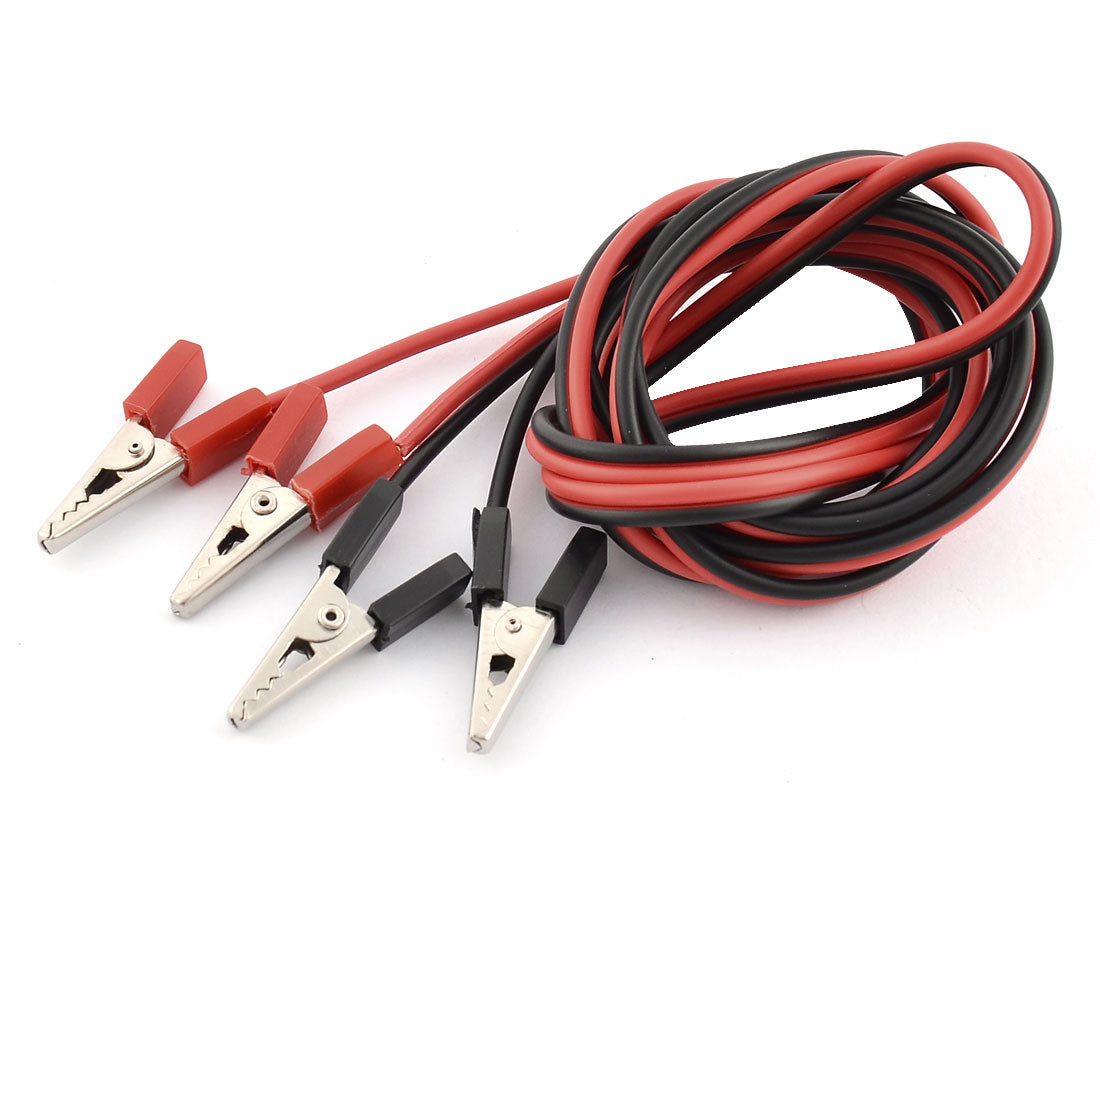 uxcell Uxcell Double End Alligator Clip Clamp Battery Test  Jumper Cable 1.5M Long